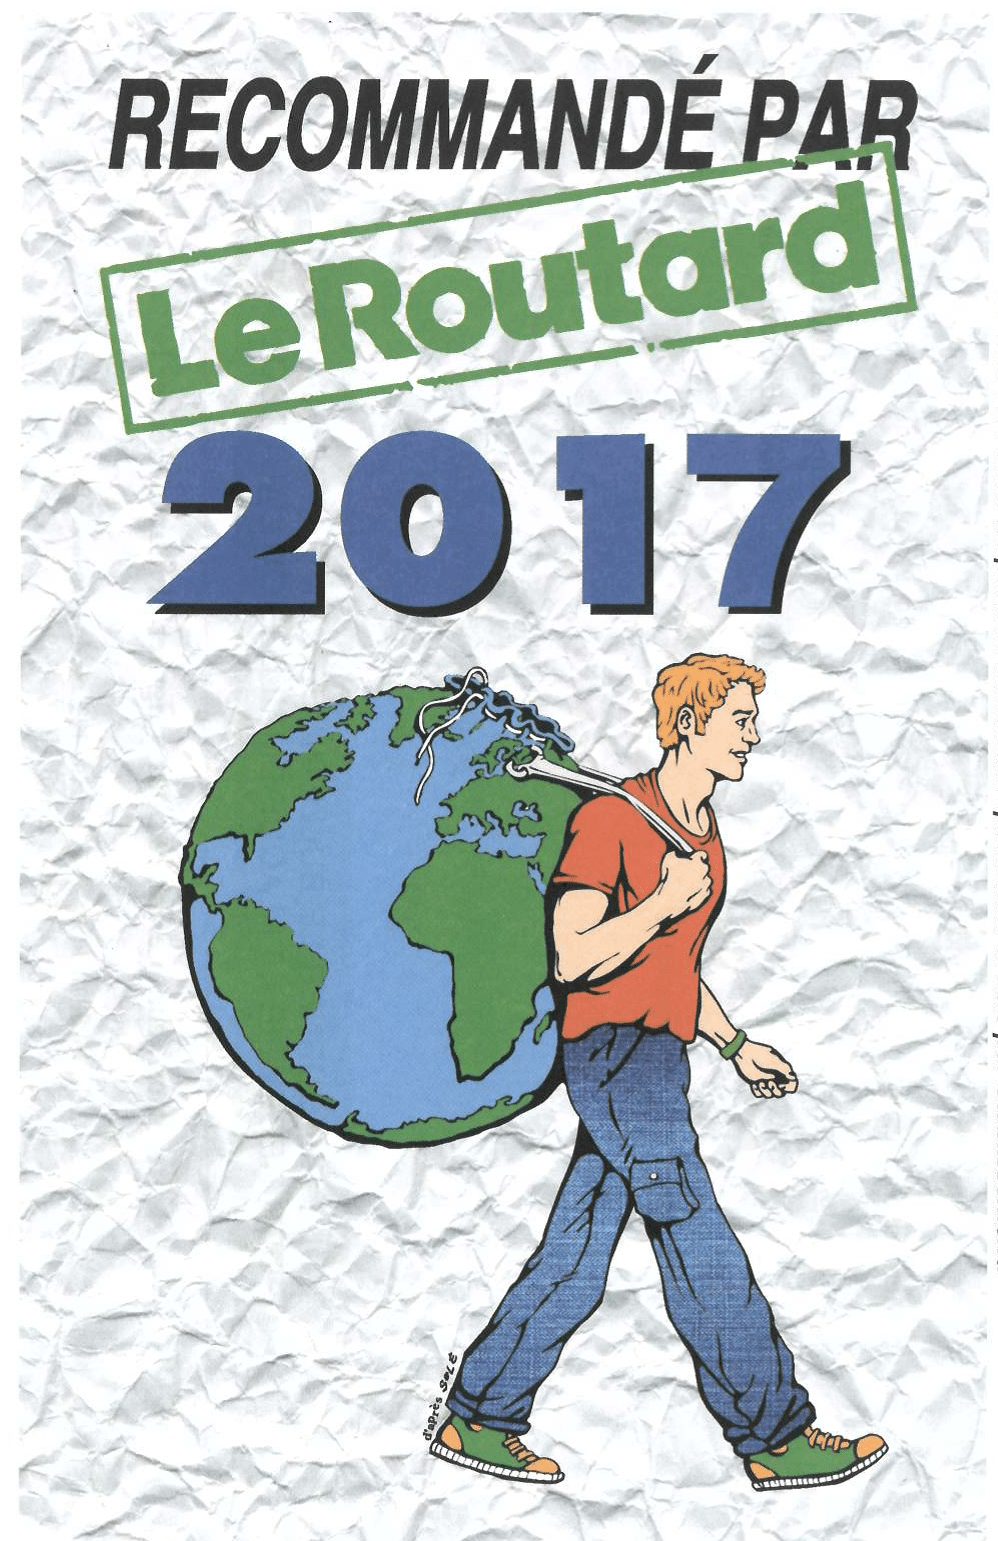 Le routard 2017